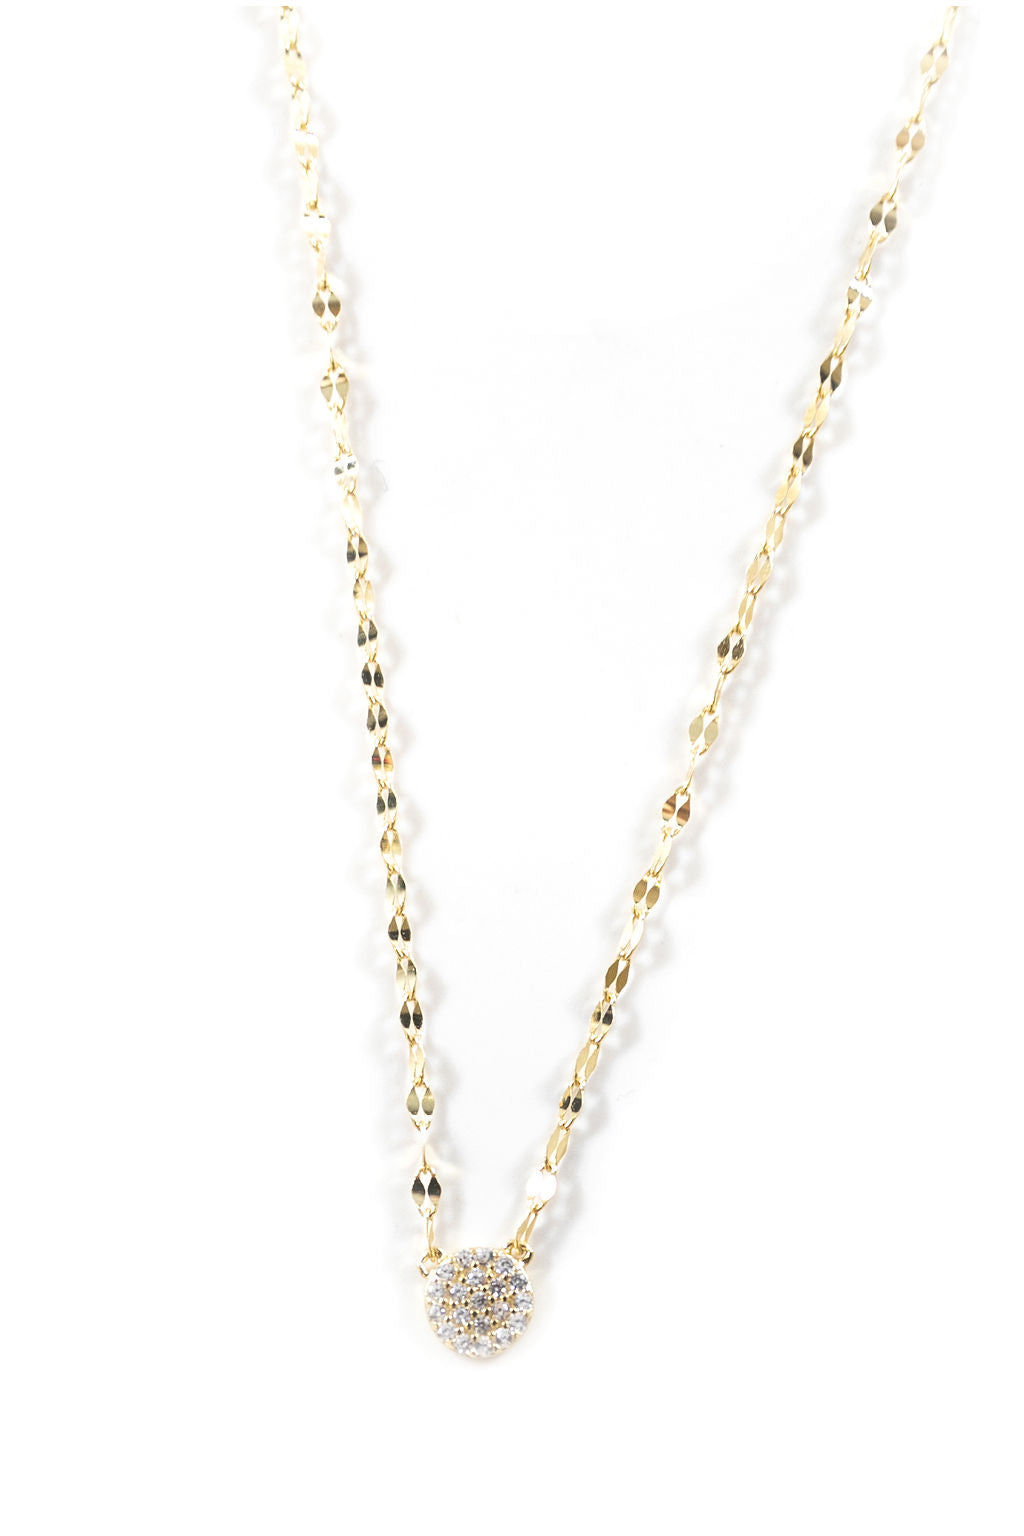 Shining Stone Chain Necklace